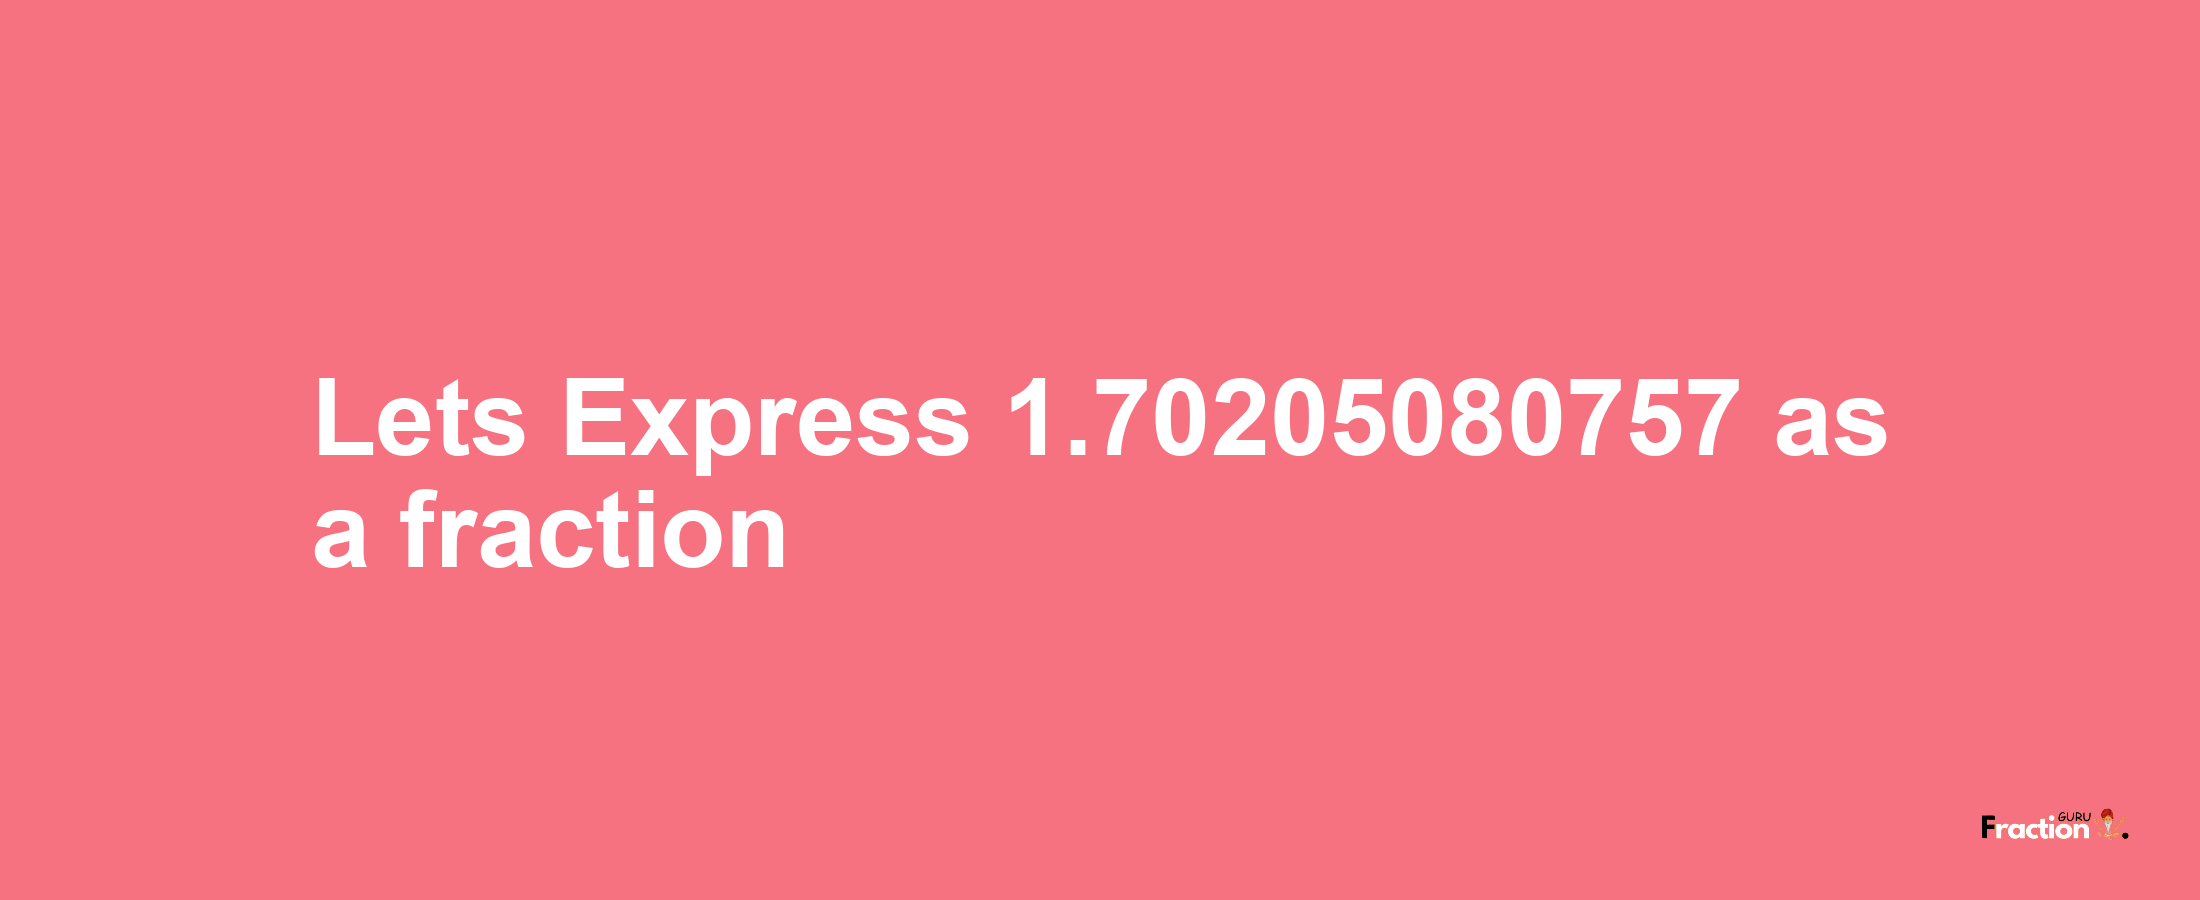 Lets Express 1.70205080757 as afraction